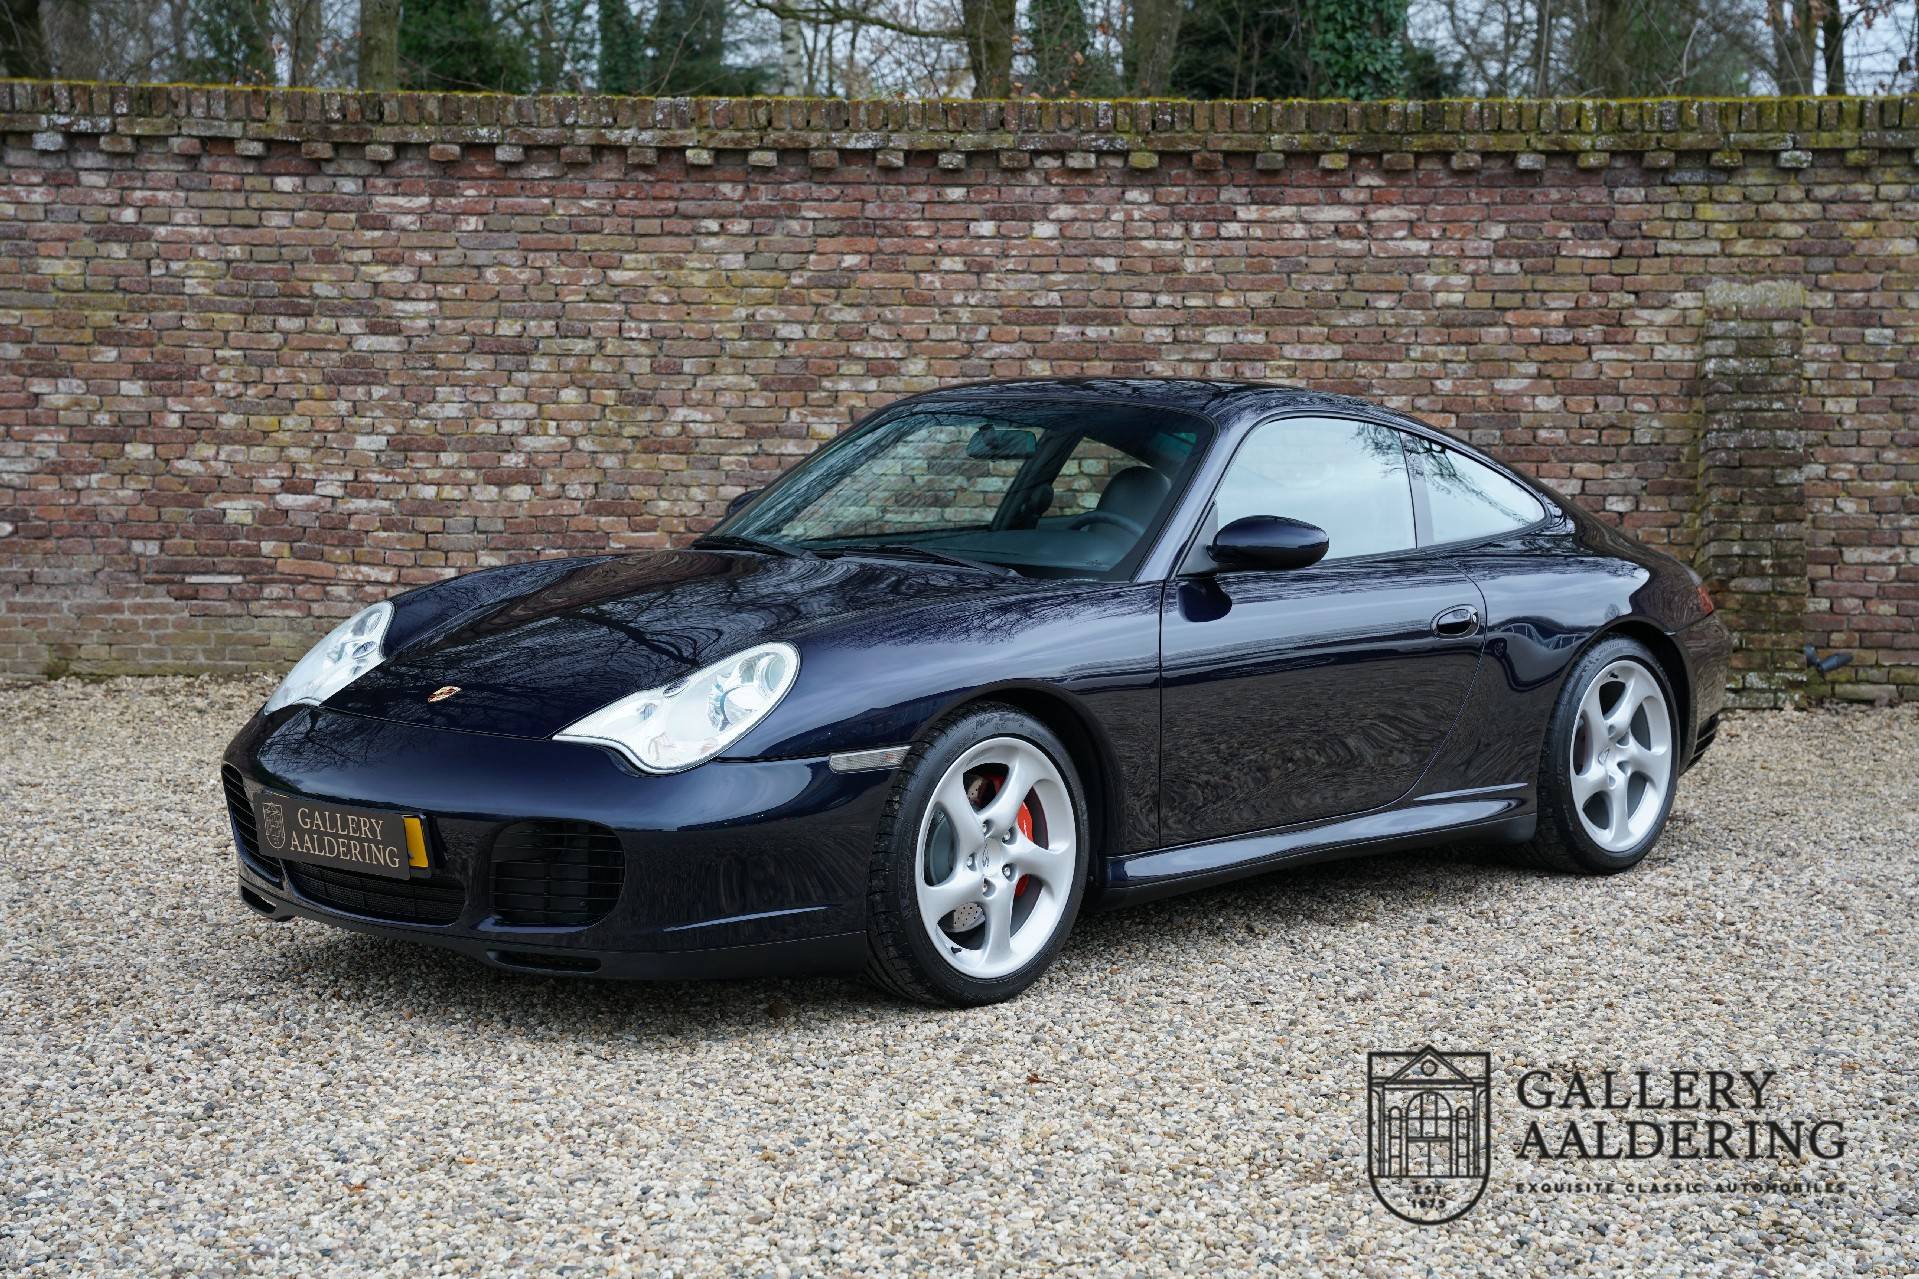 For Sale: Porsche 911 Carrera 4S (2003) offered for £46,692